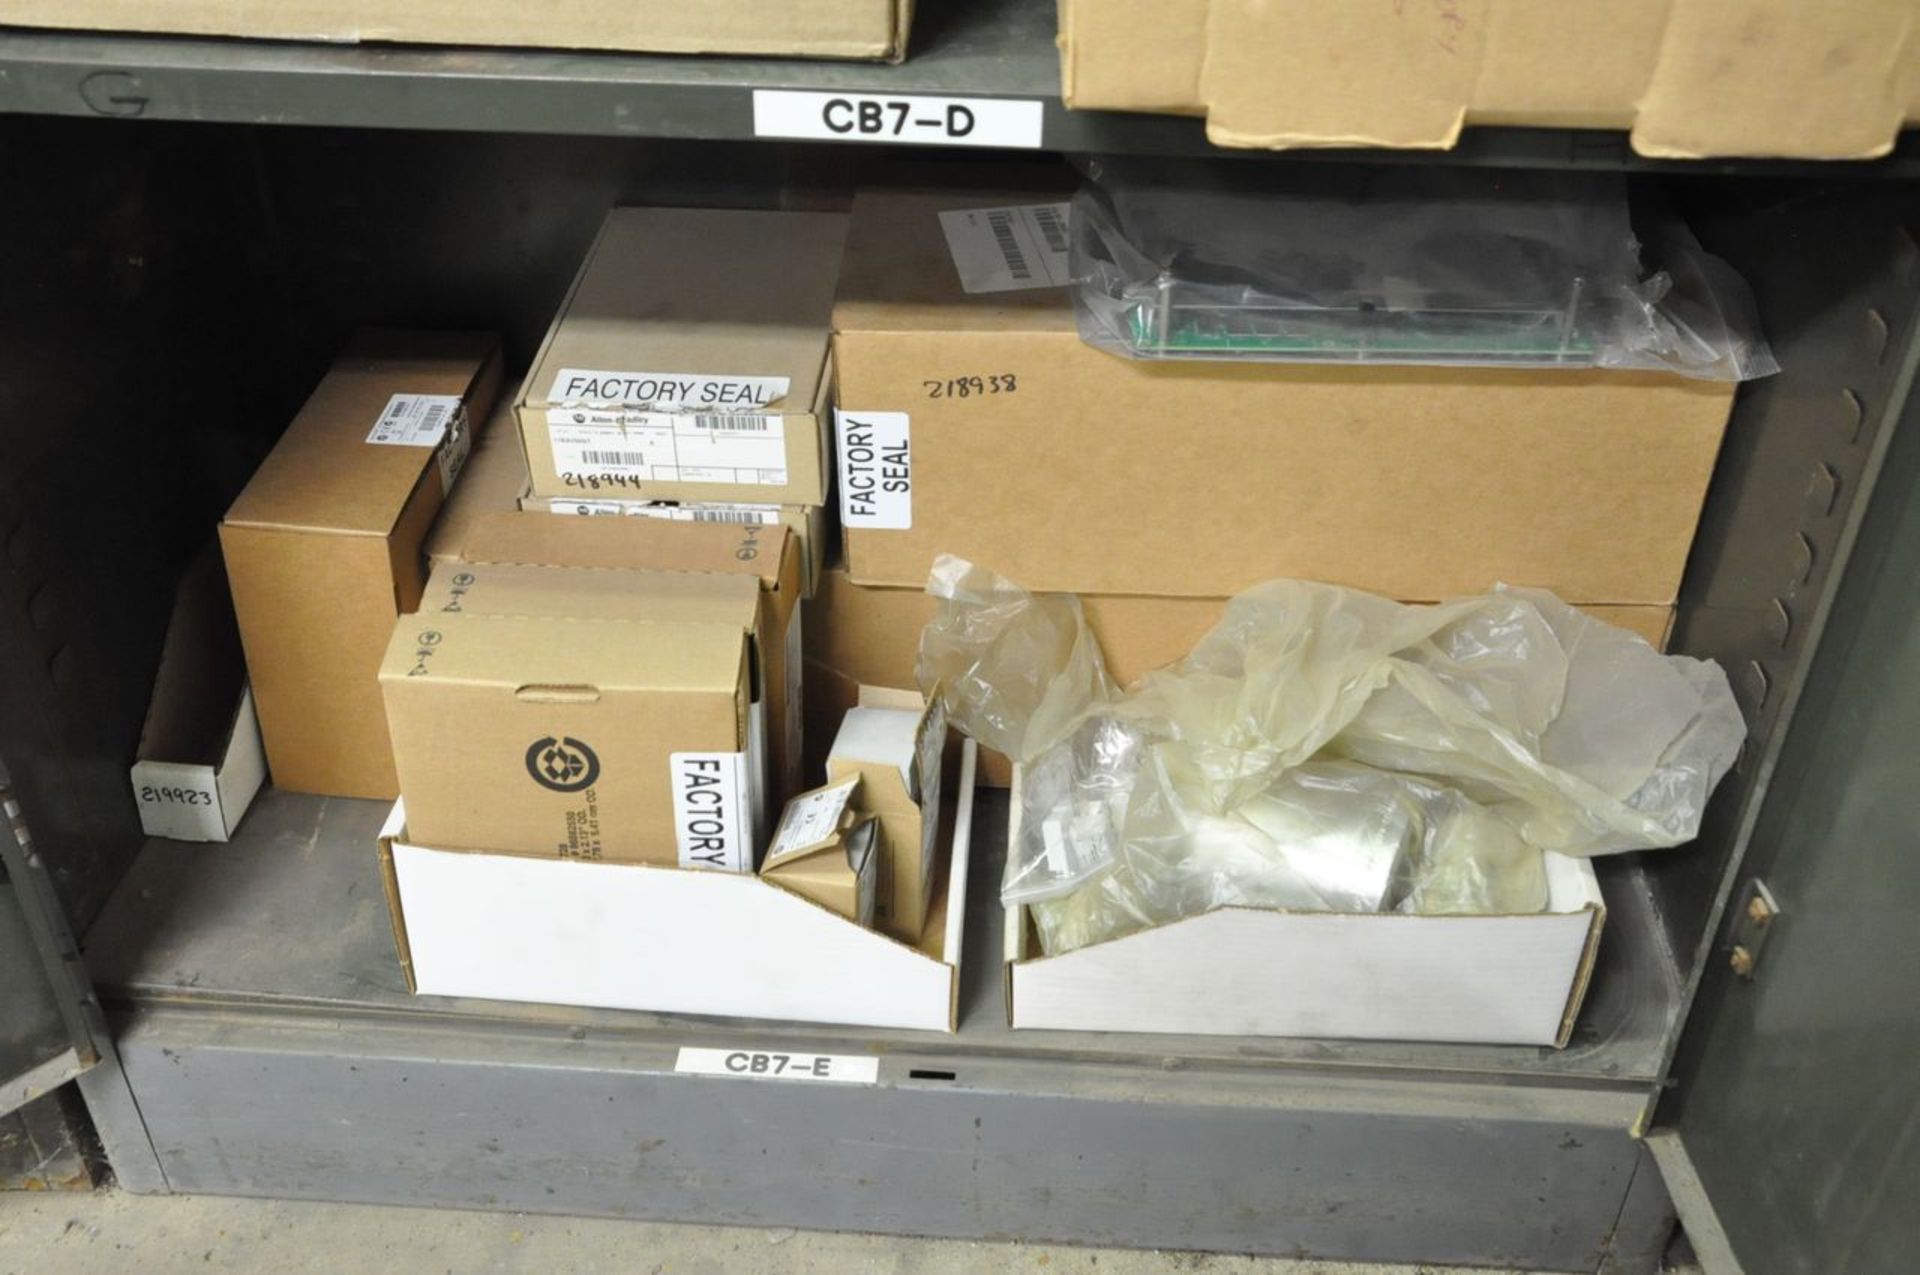 Lot - Fuses, Power Packs, Amp-Traps, Industrial Circuit Breakers, etc. in (1) Cabinet, (Cabinet - Image 5 of 5